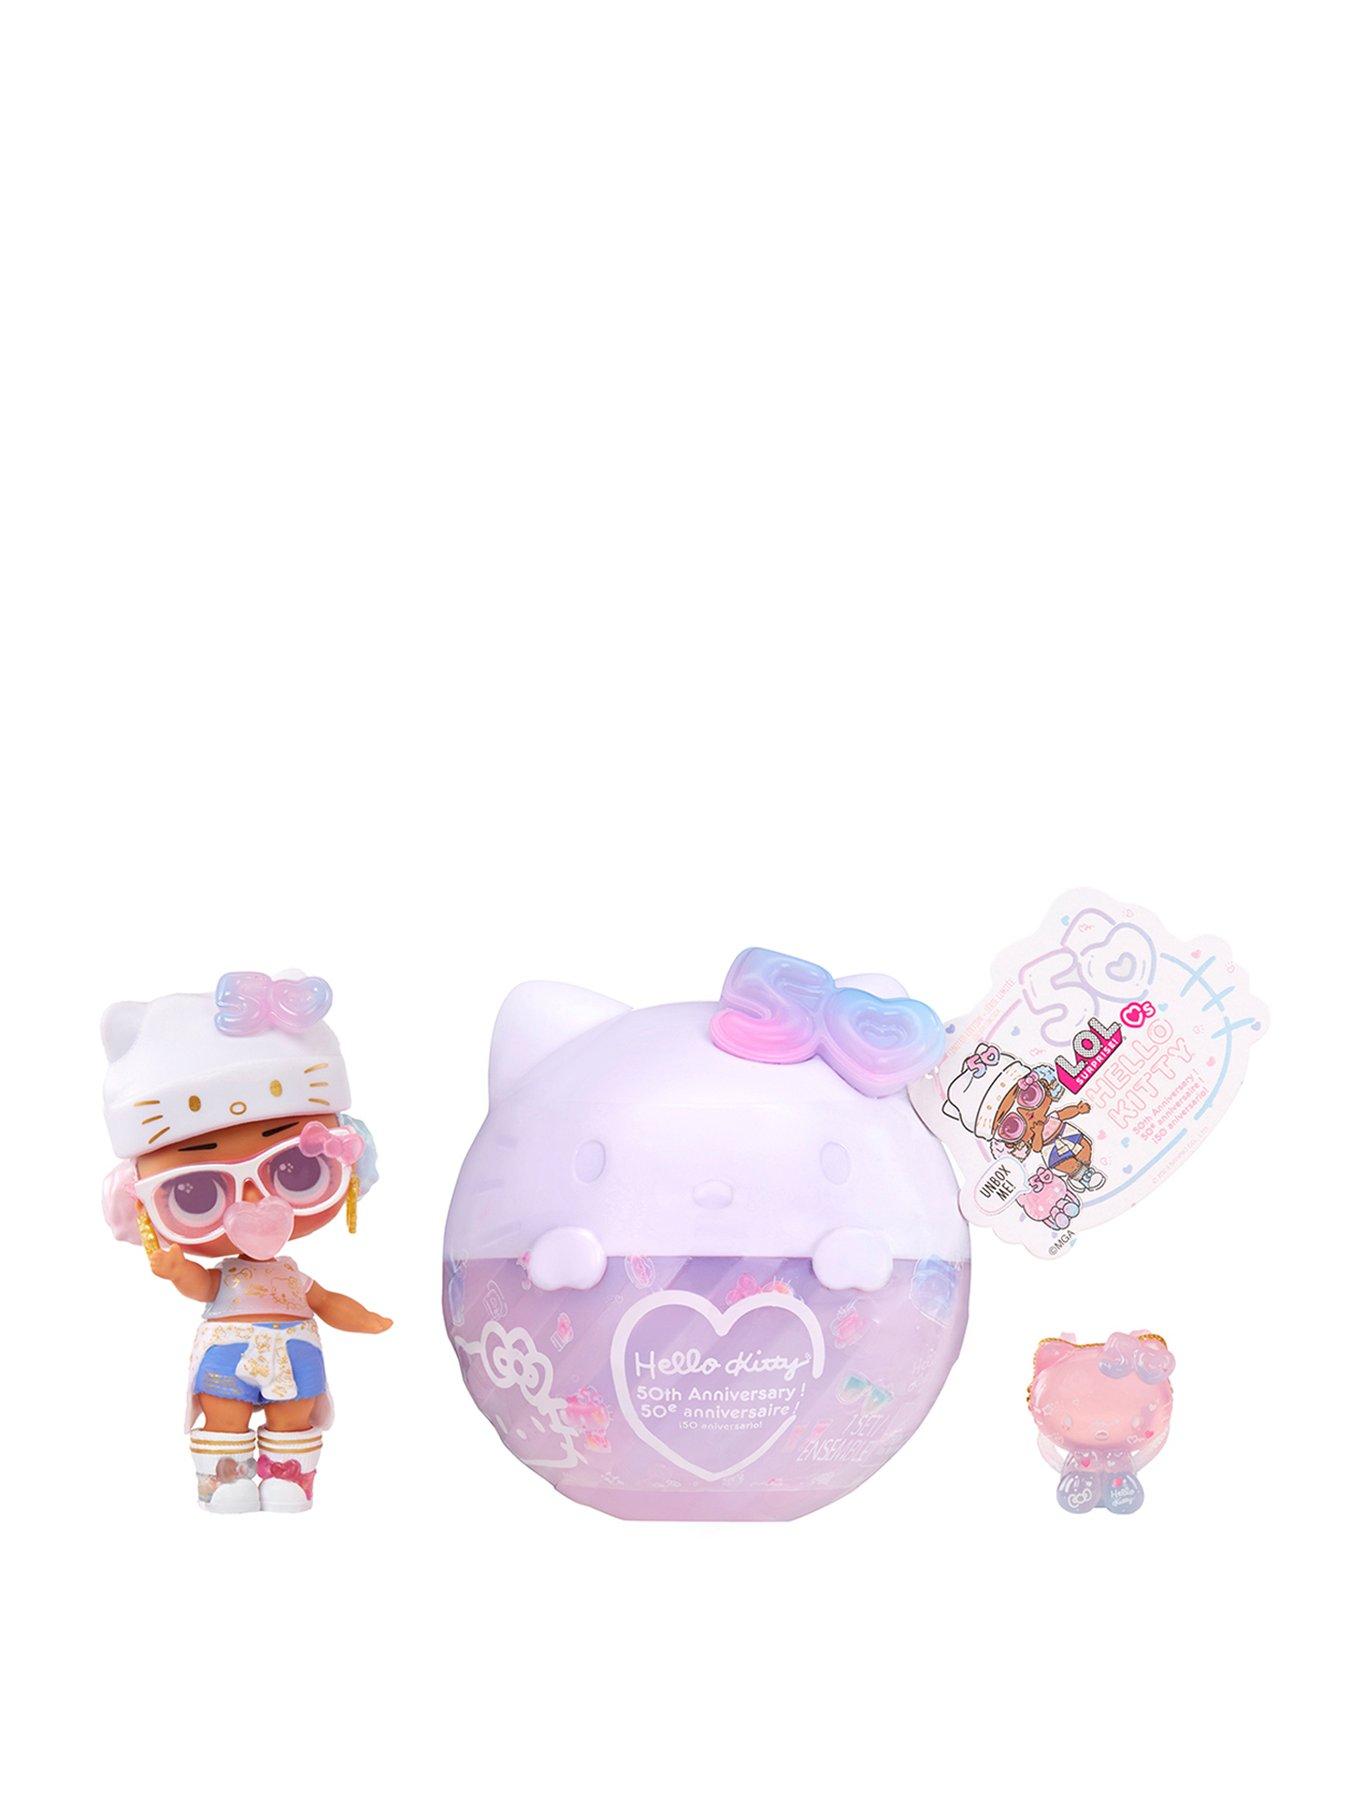 Toys Uncle L O L Surprise (Glitter Surprise Mystery Pack Doll with Candide  Accessories) : Amazon.in: Toys & Games